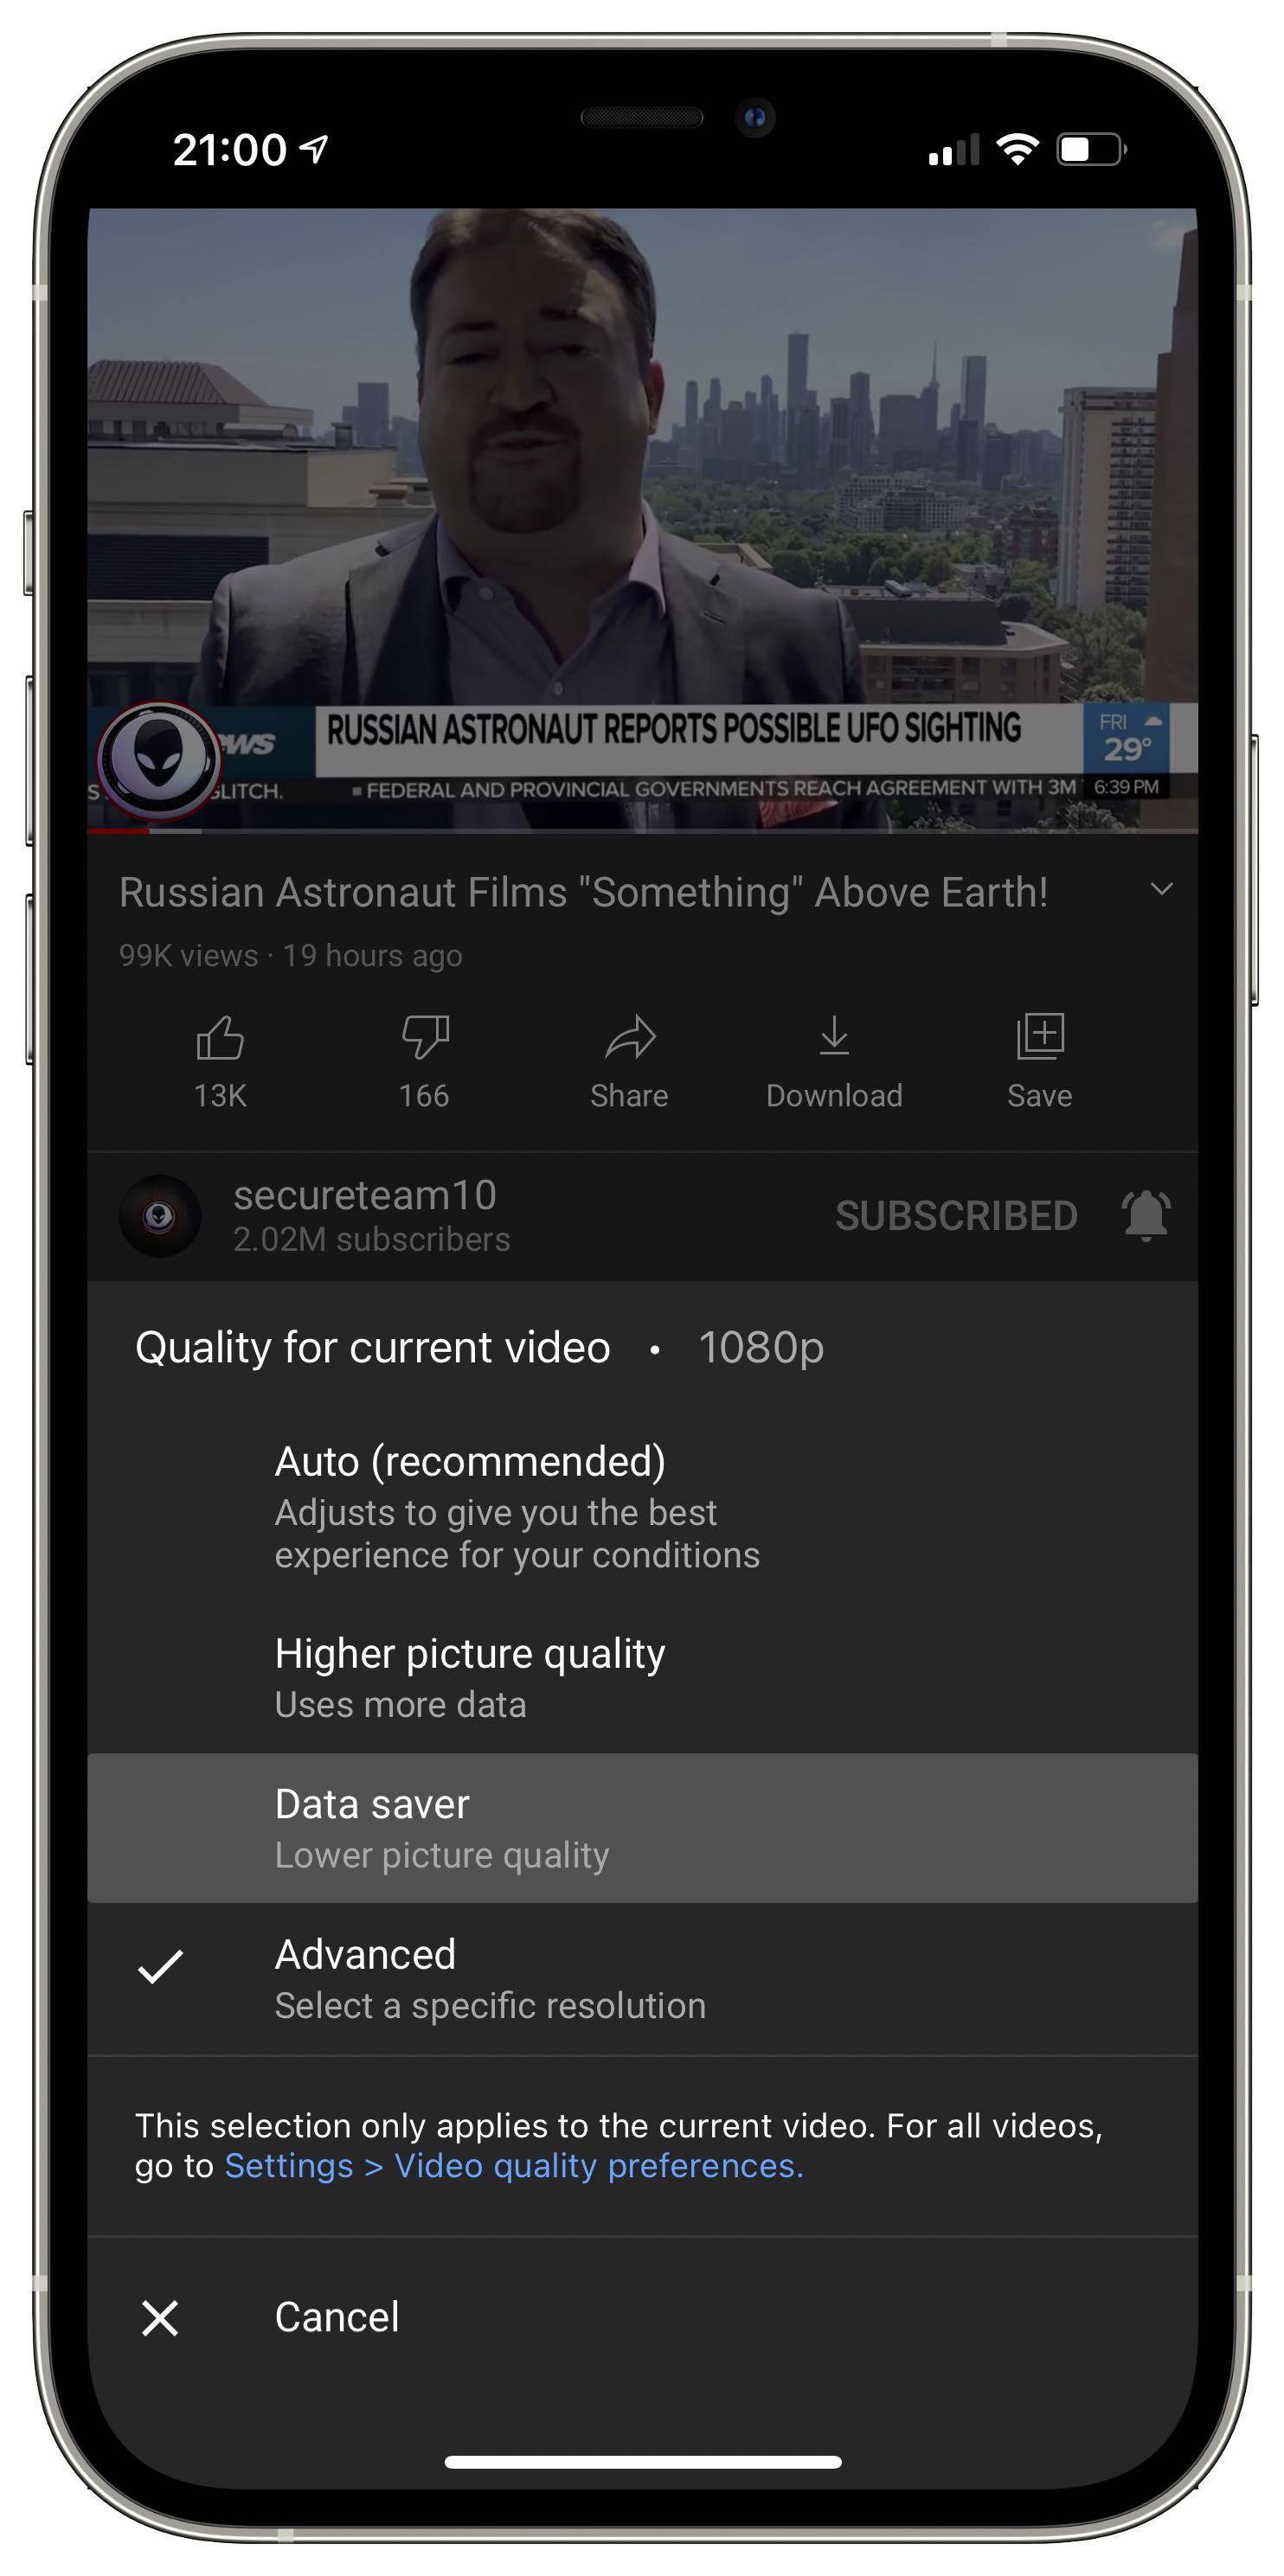 A screenshot showing the video resolution selector in the mobile YouTube app